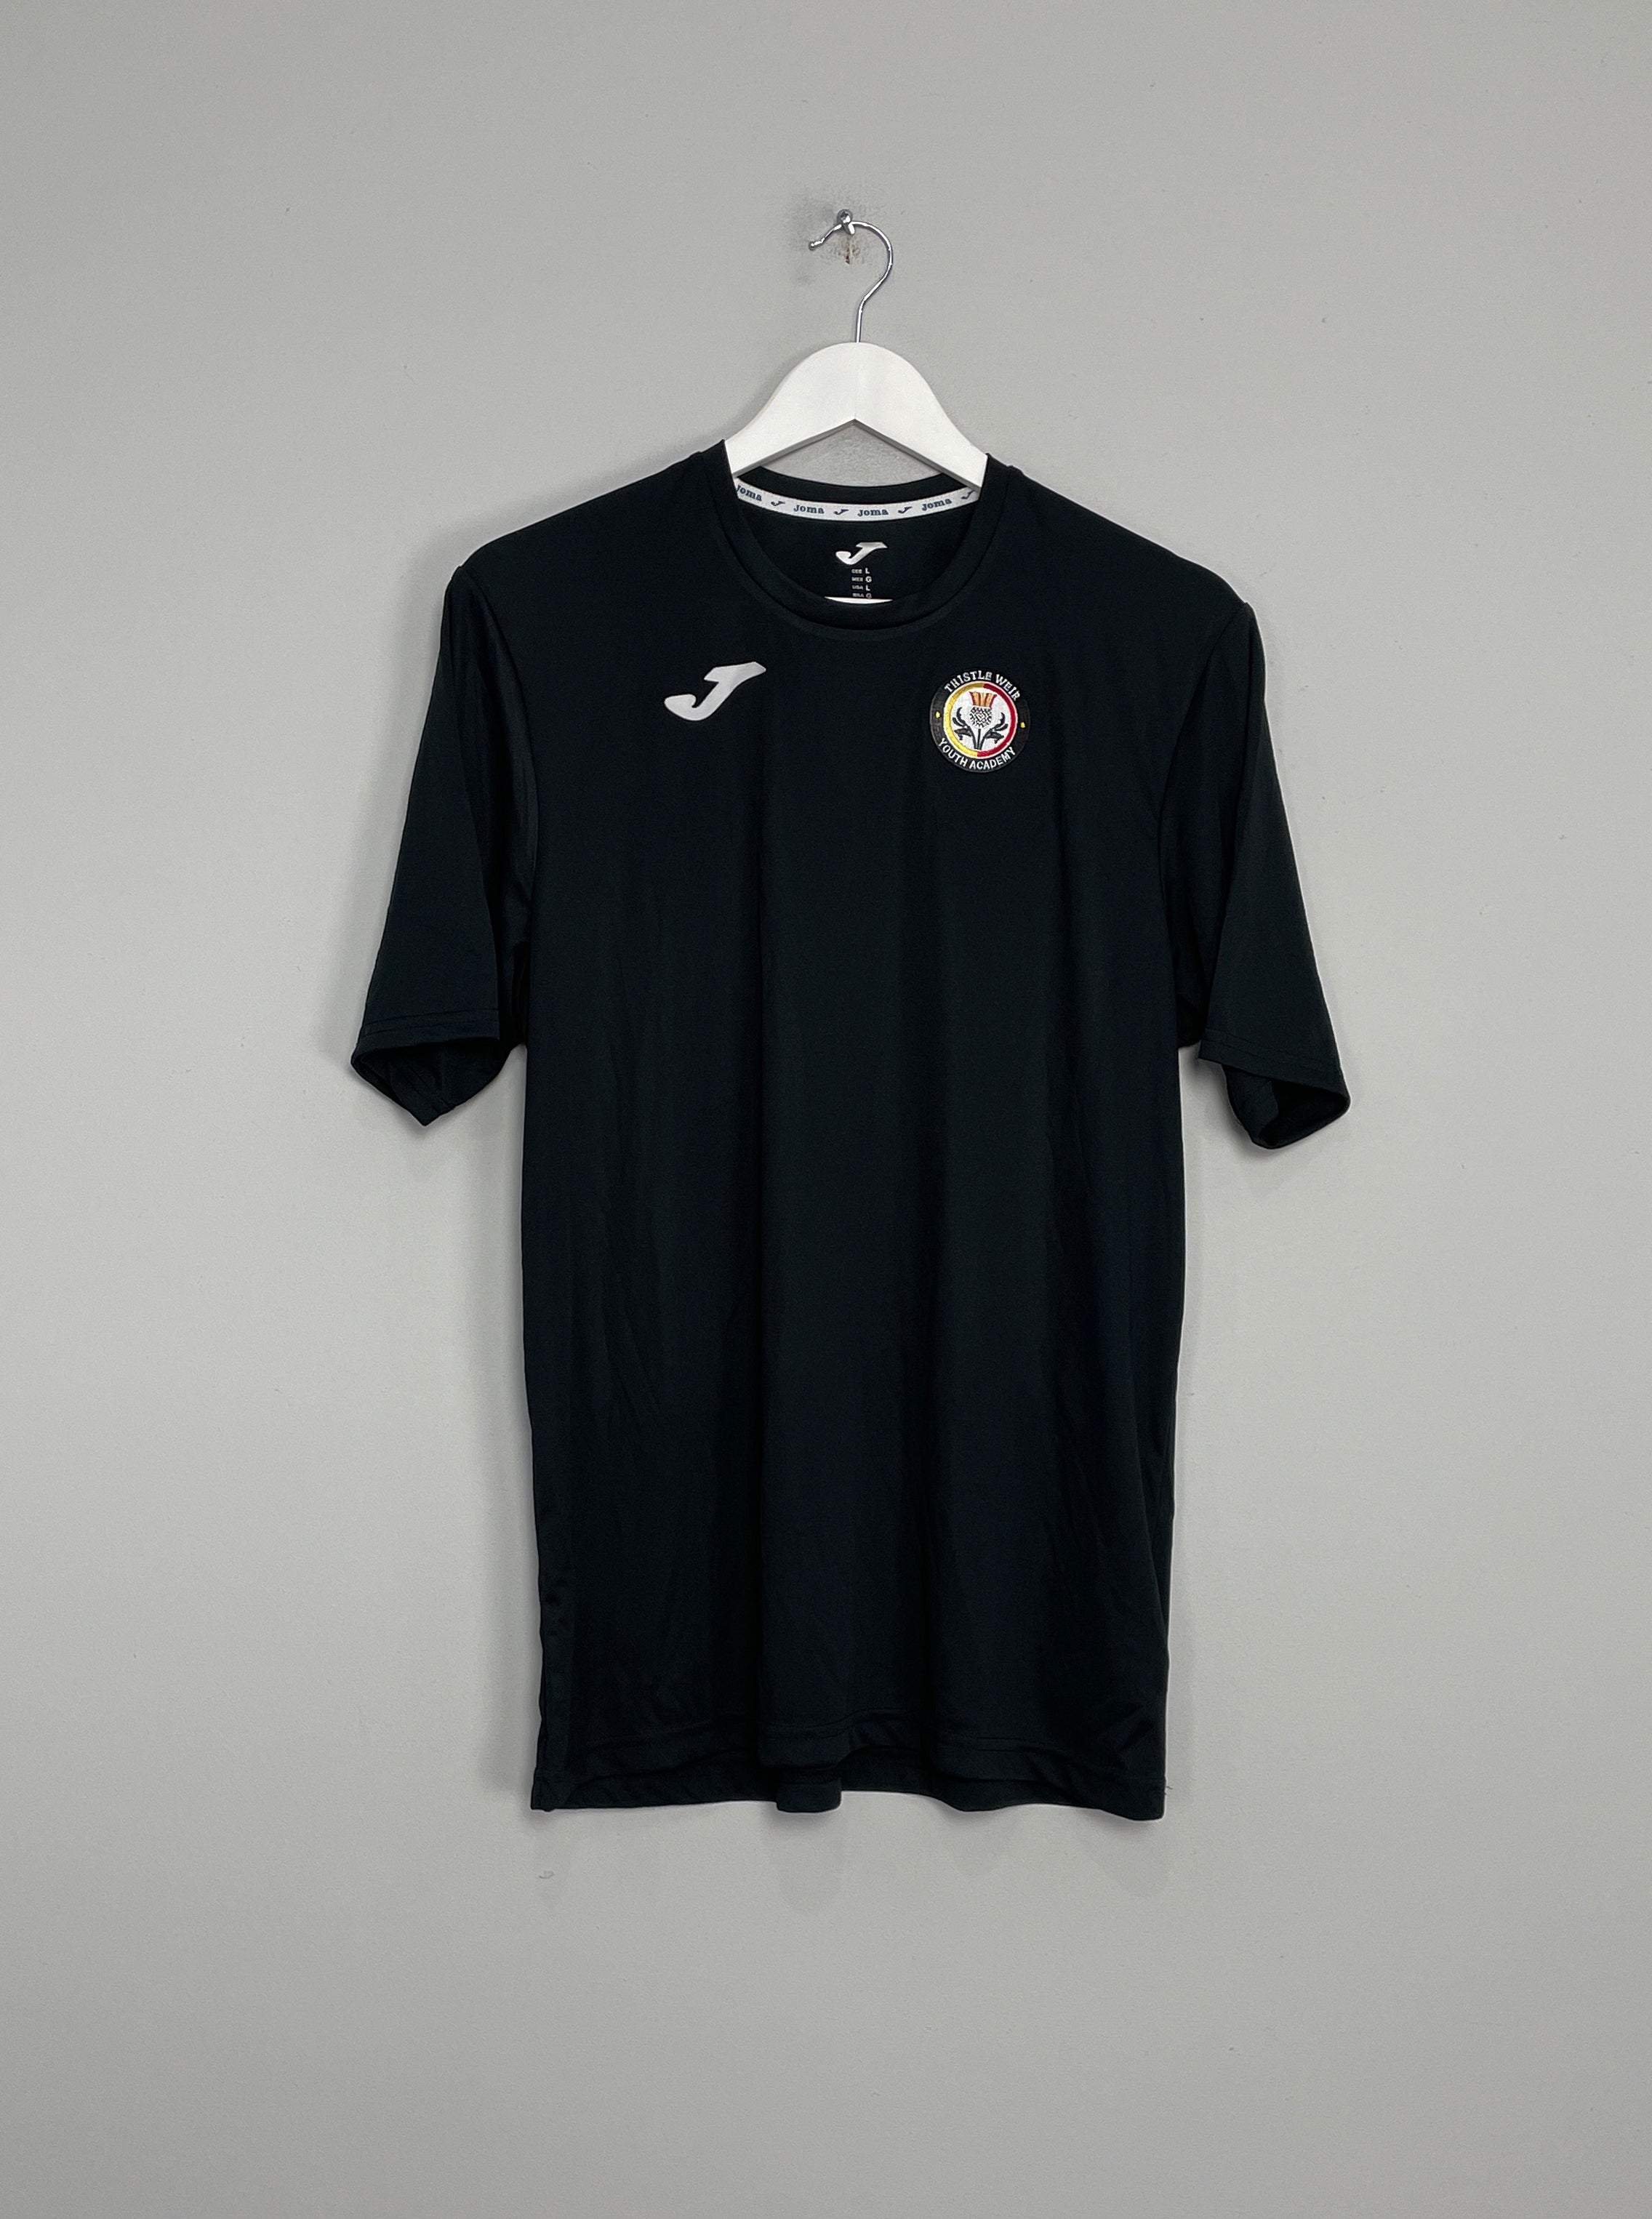 2018/19 THISTLE WEIR YOUTH TRAINING SHIRT (L) JOMA